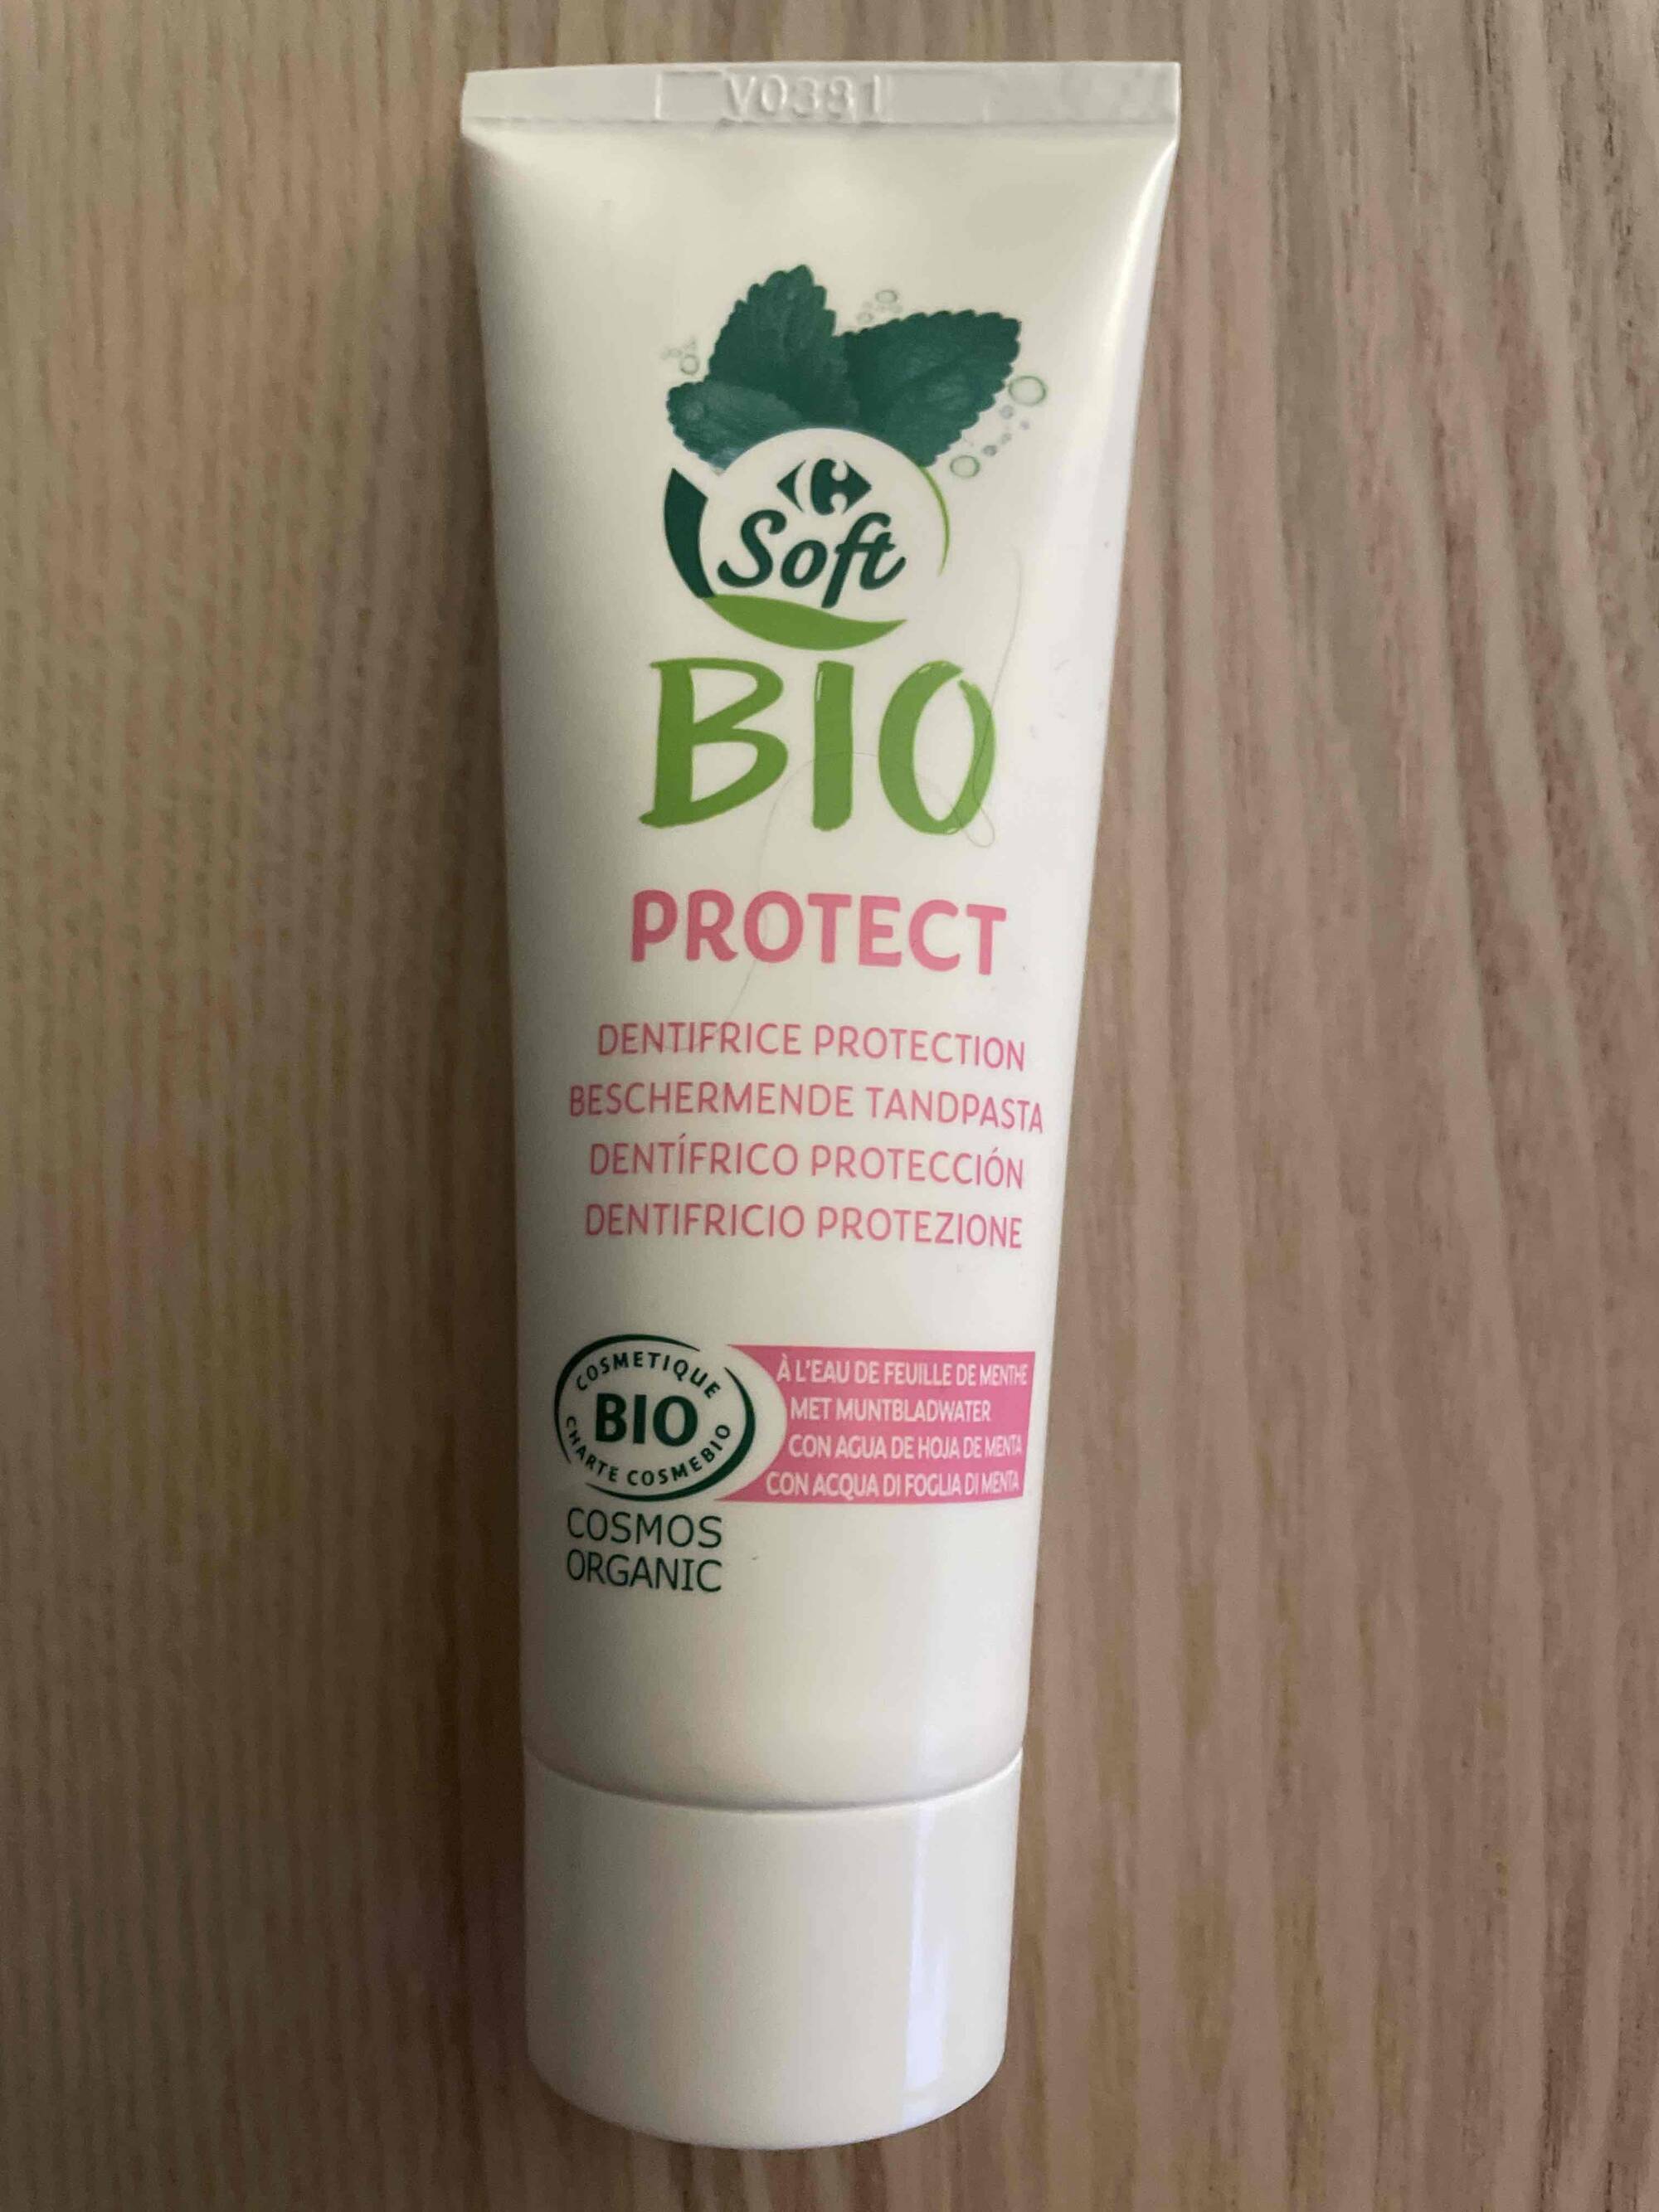 CARREFOUR SOFT - Bio protect - Dentifrice protection